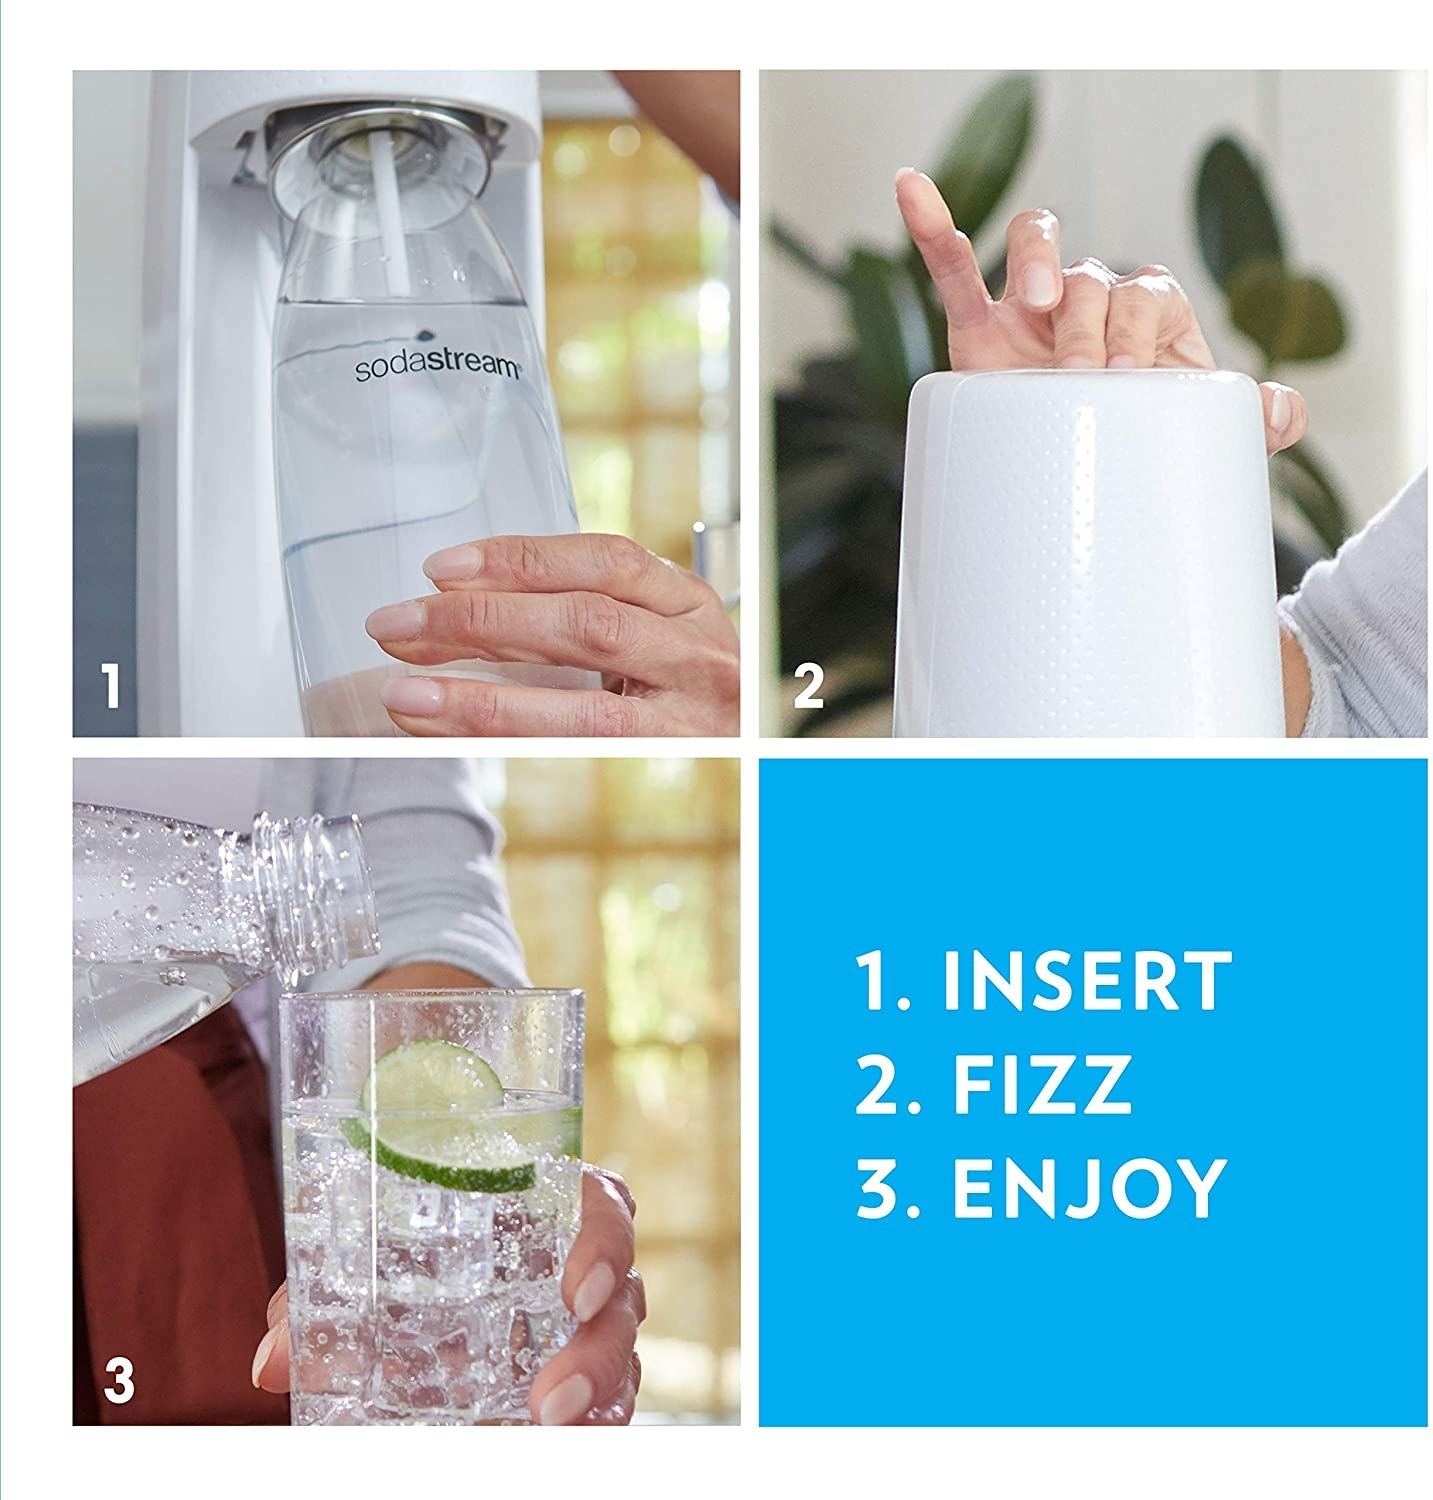 A series of images showing how the SodaStream is used